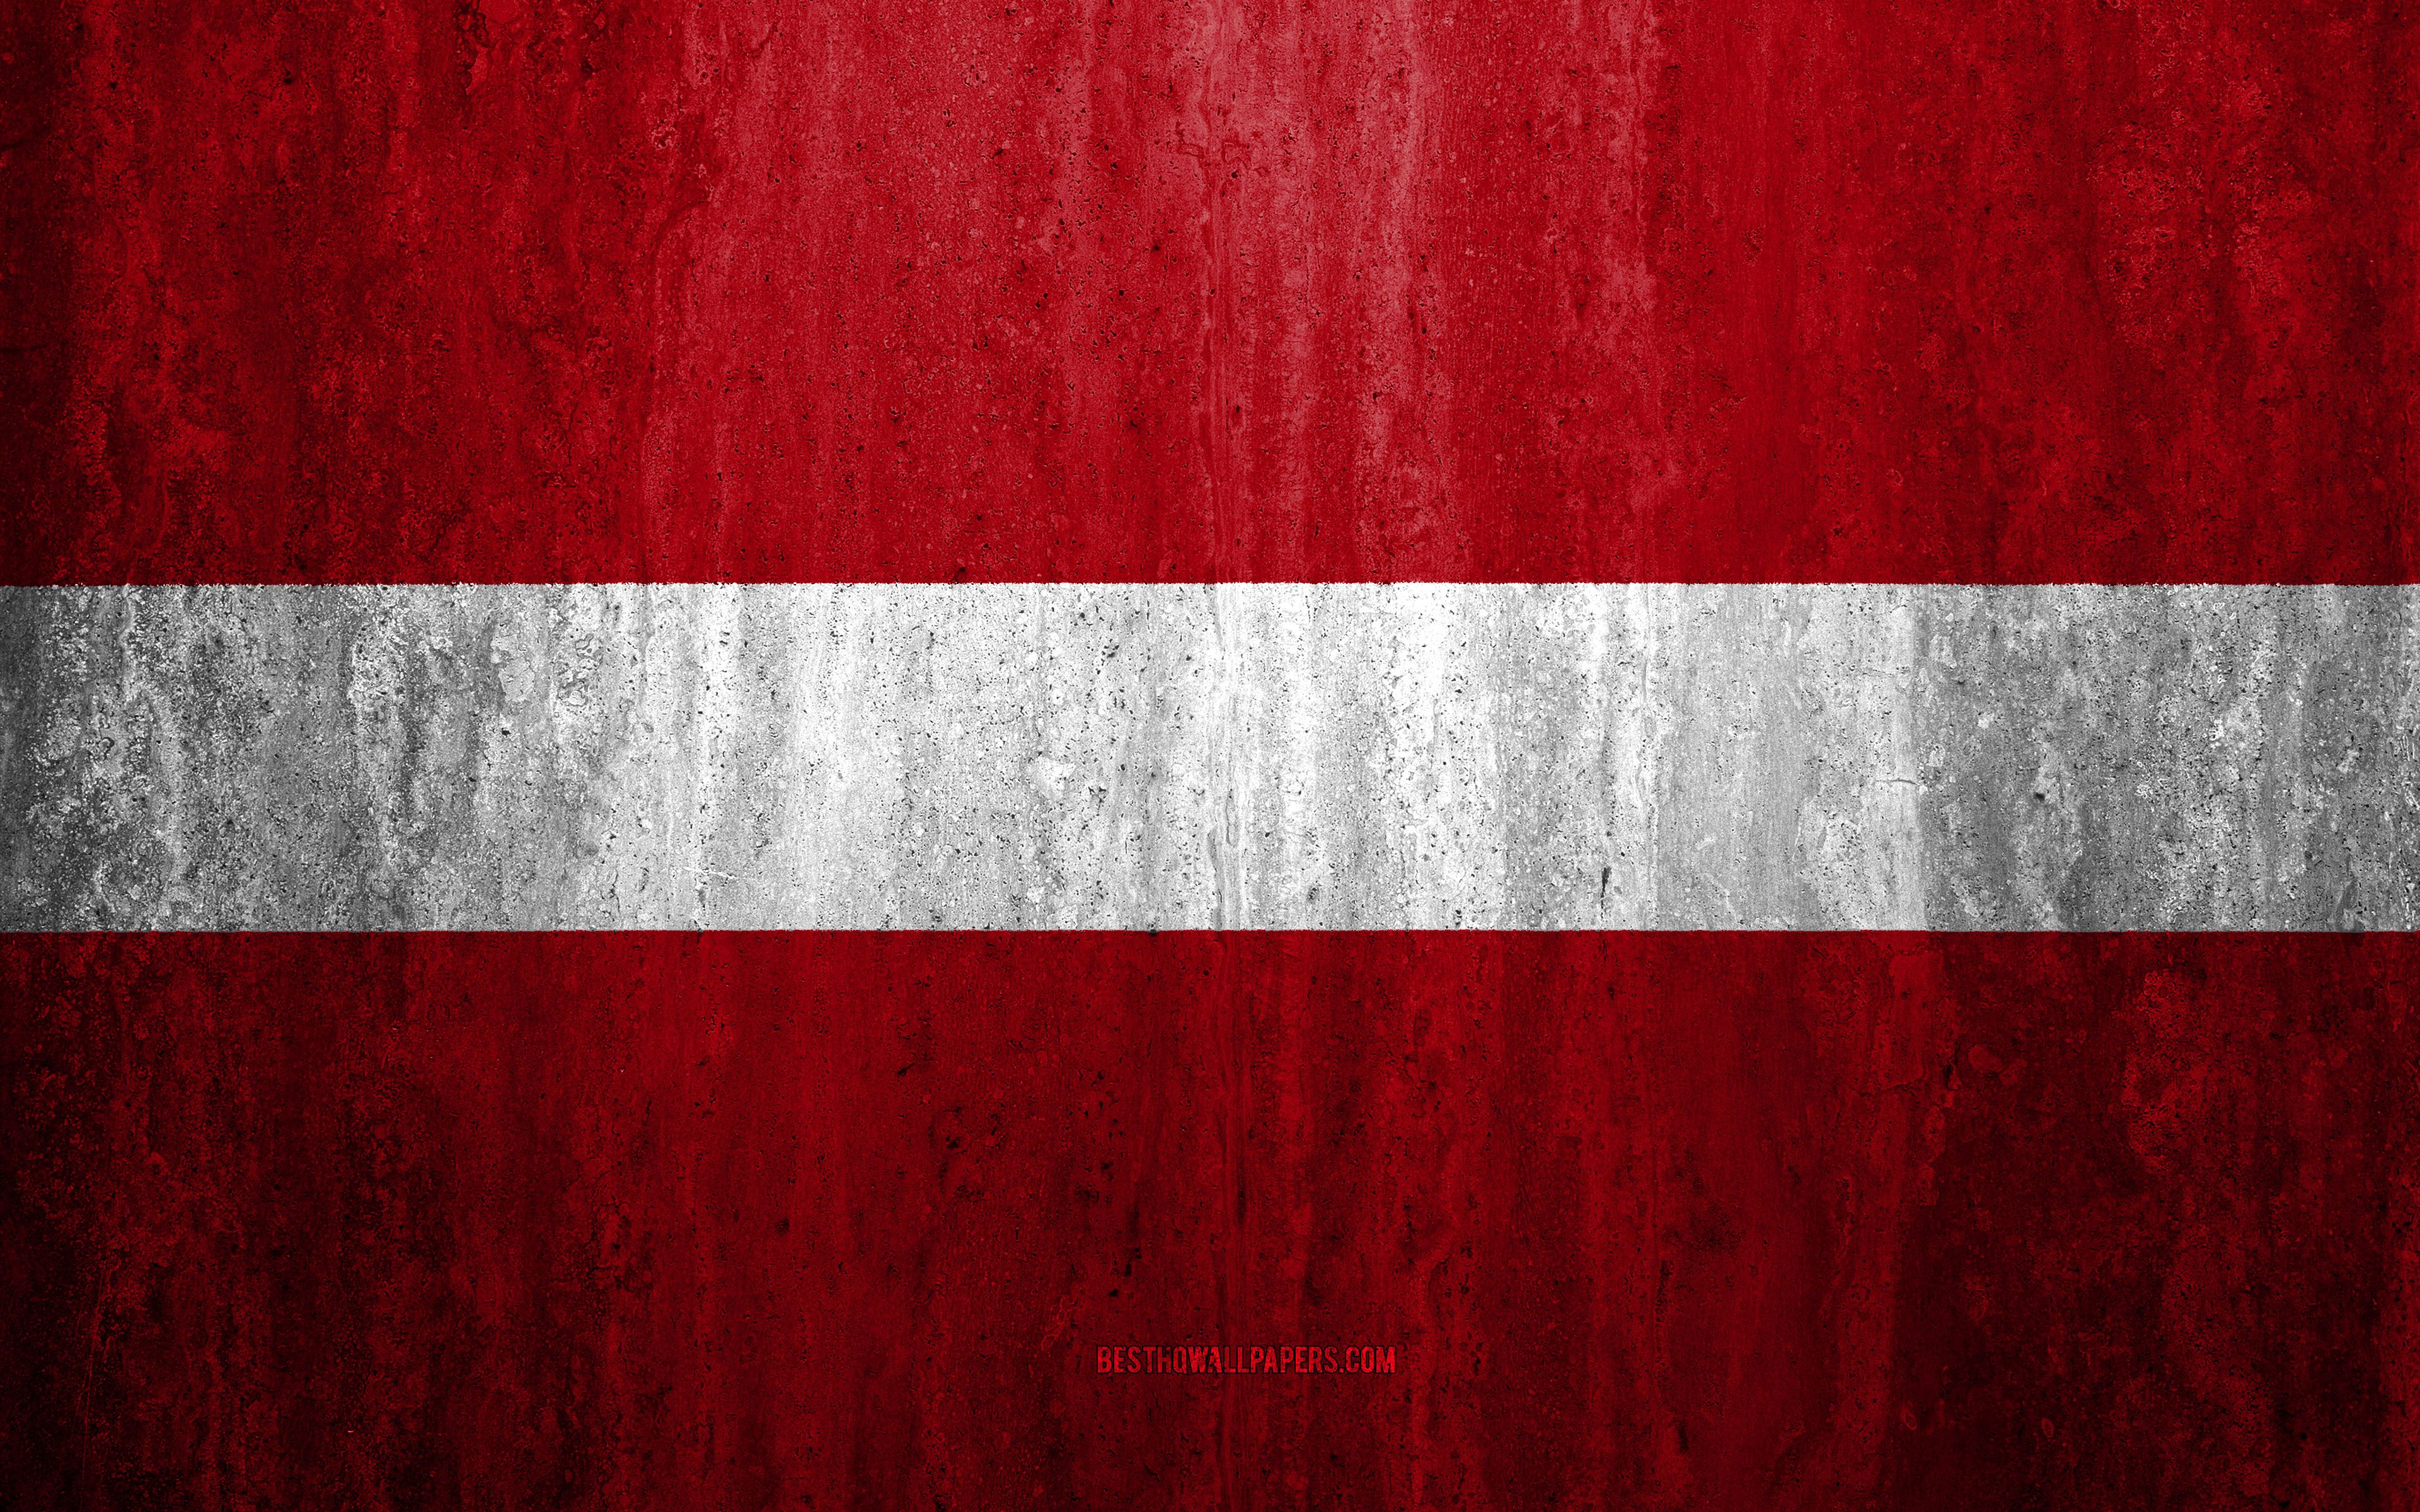 Download wallpaper Flag of Latvia, 4k, stone background, grunge flag, Europe, Latvia flag, grunge art, national symbols, Latvia, stone texture for desktop with resolution 3840x2400. High Quality HD picture wallpaper